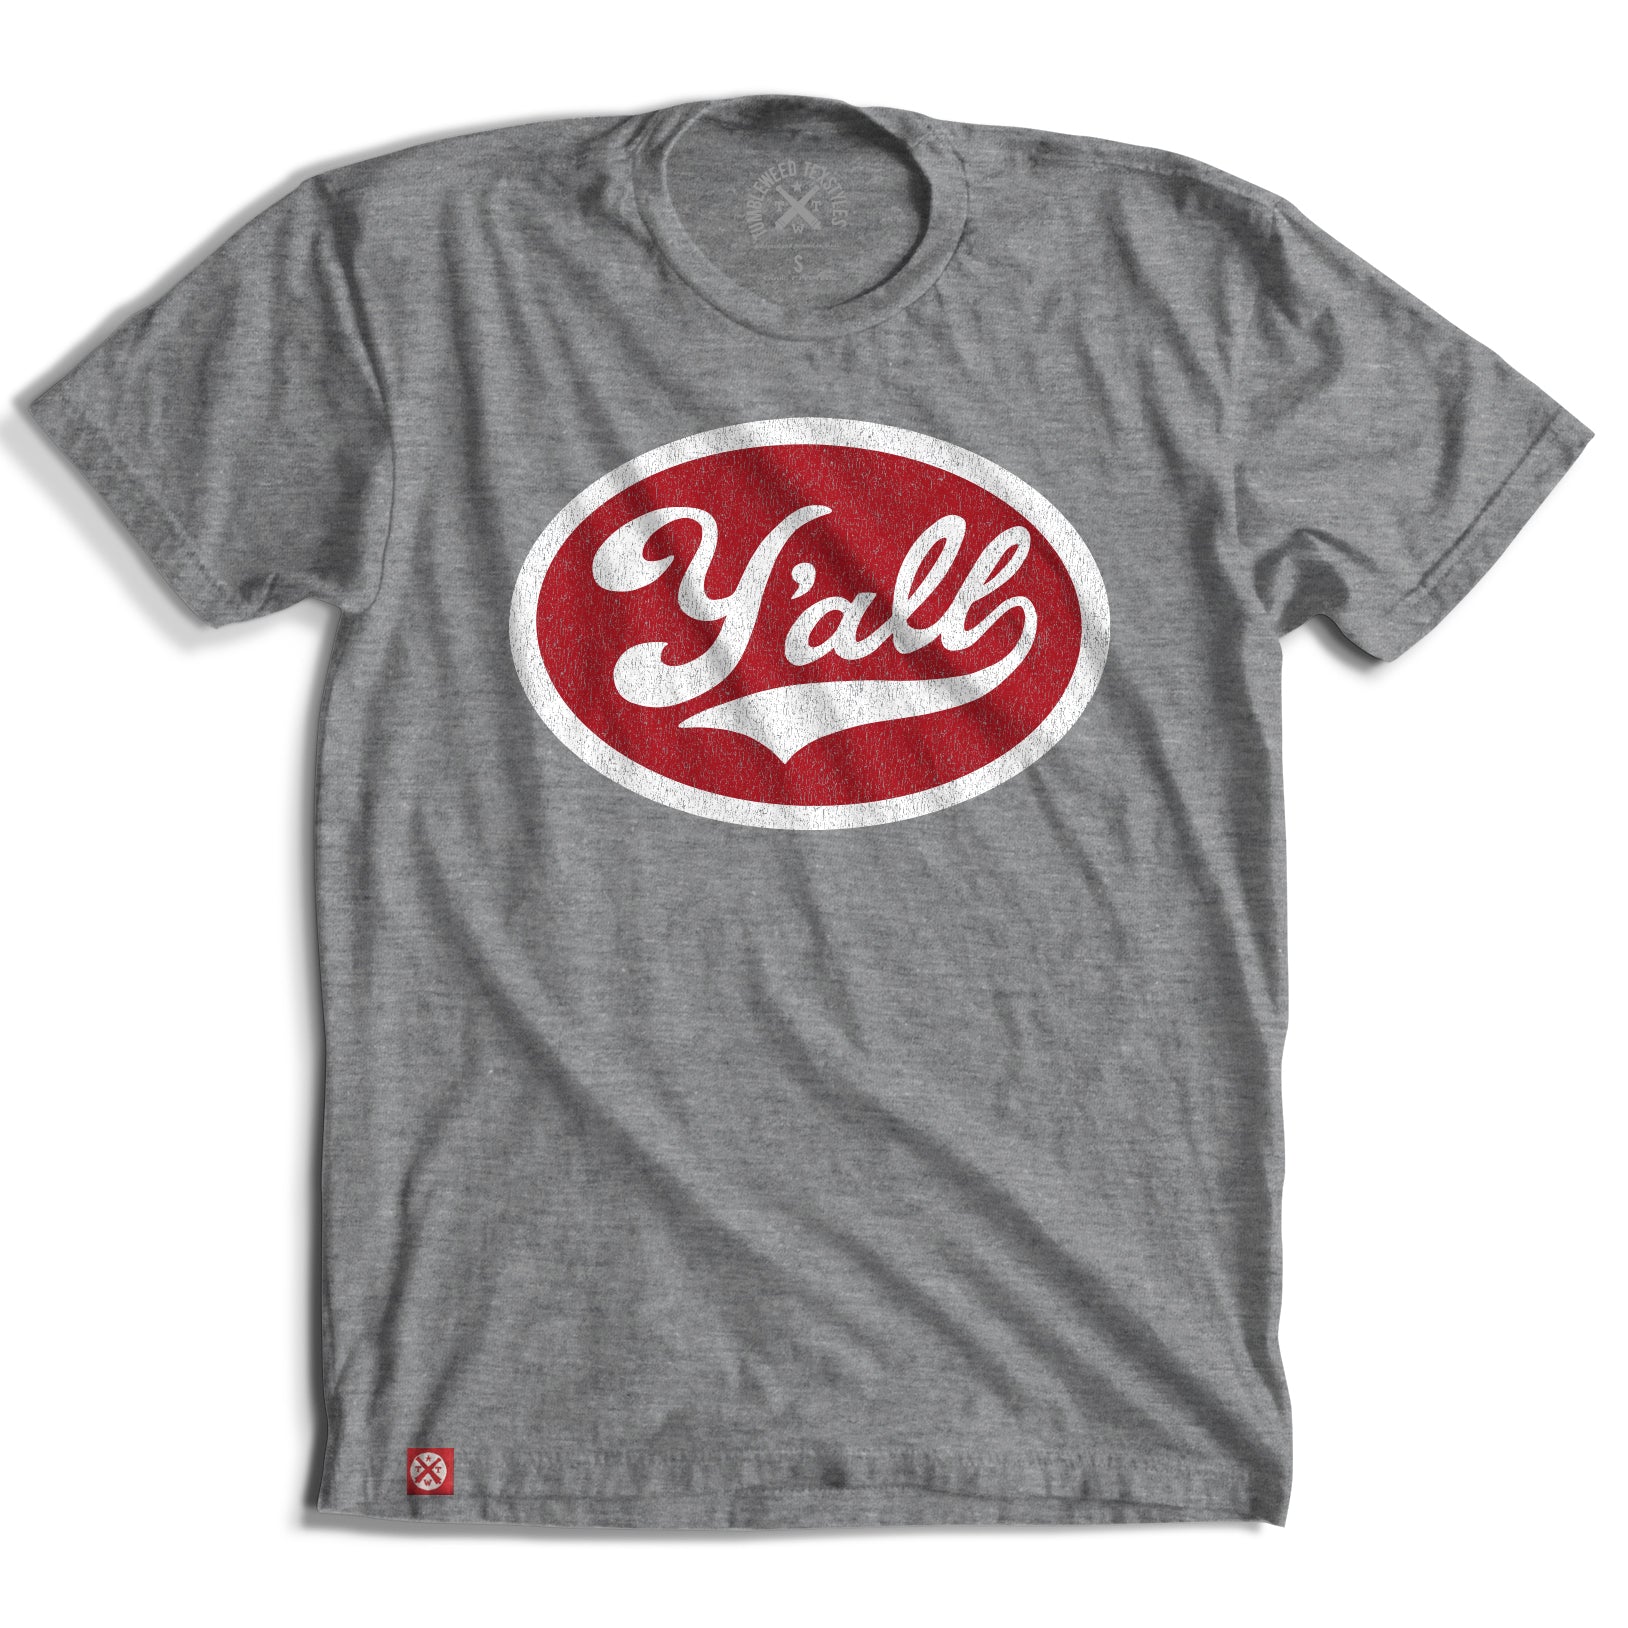 Y'all Badge T-Shirt